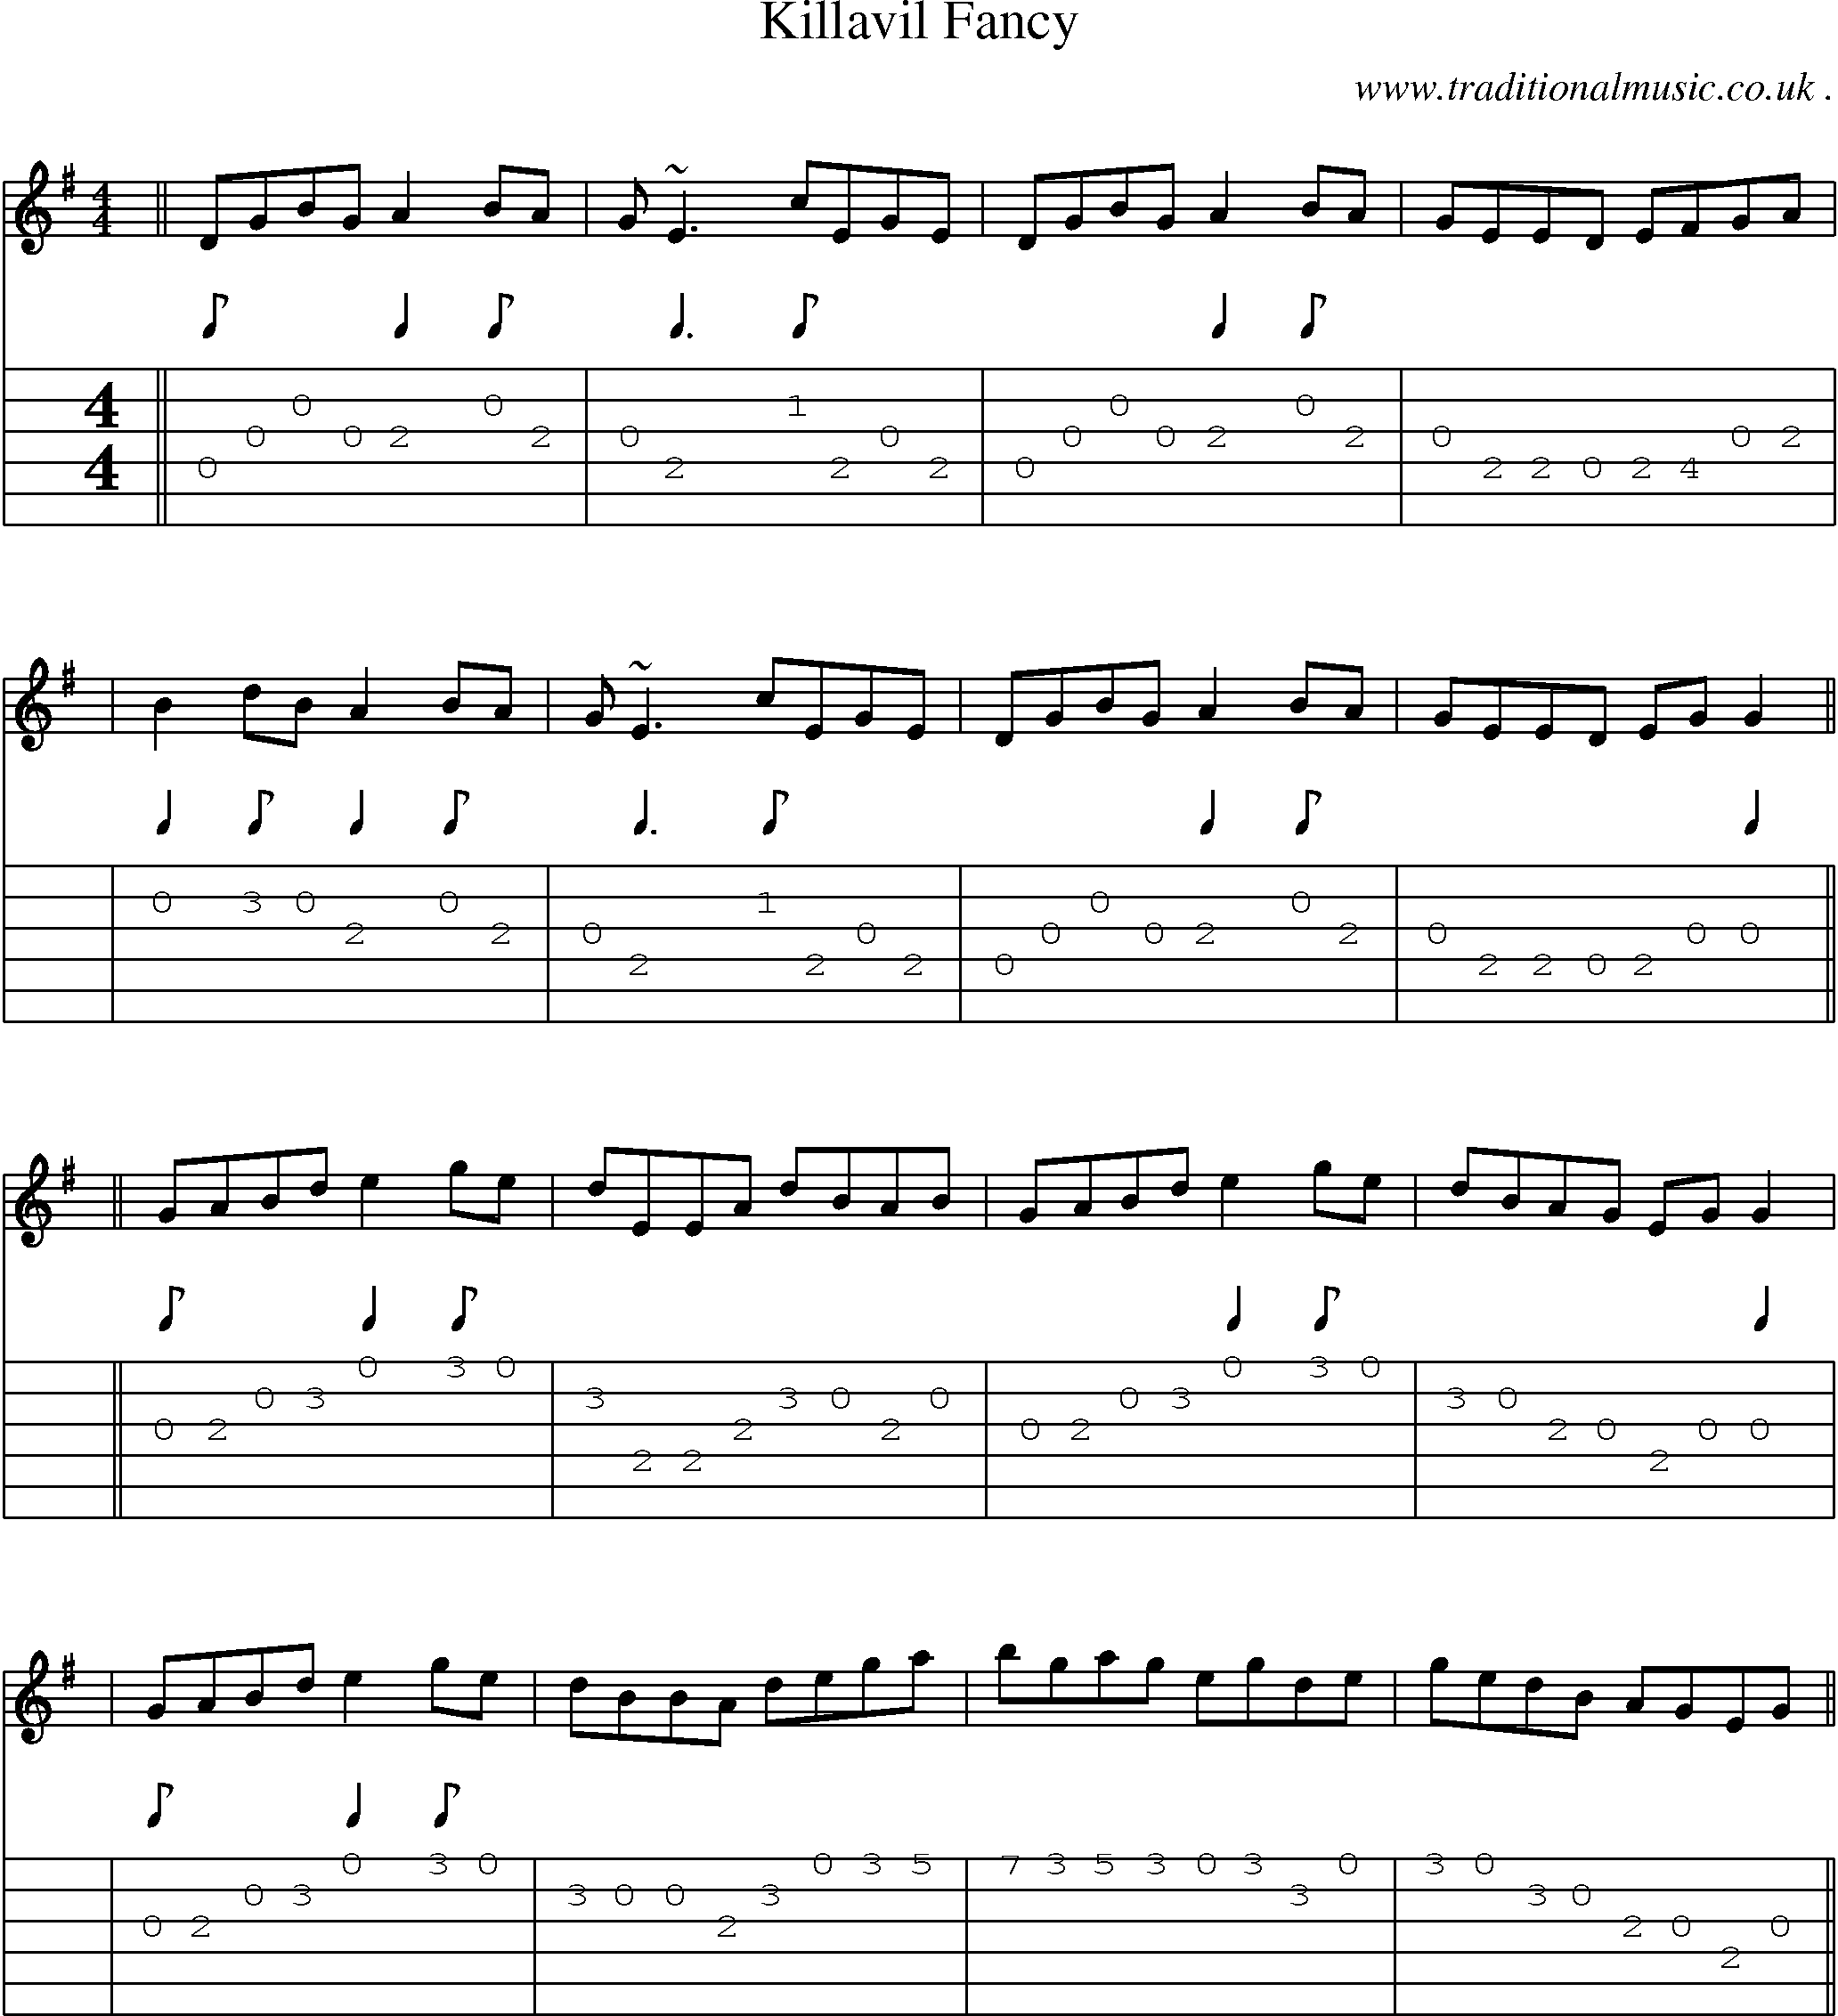 Music Score and Guitar Tabs for Killavil Fancy